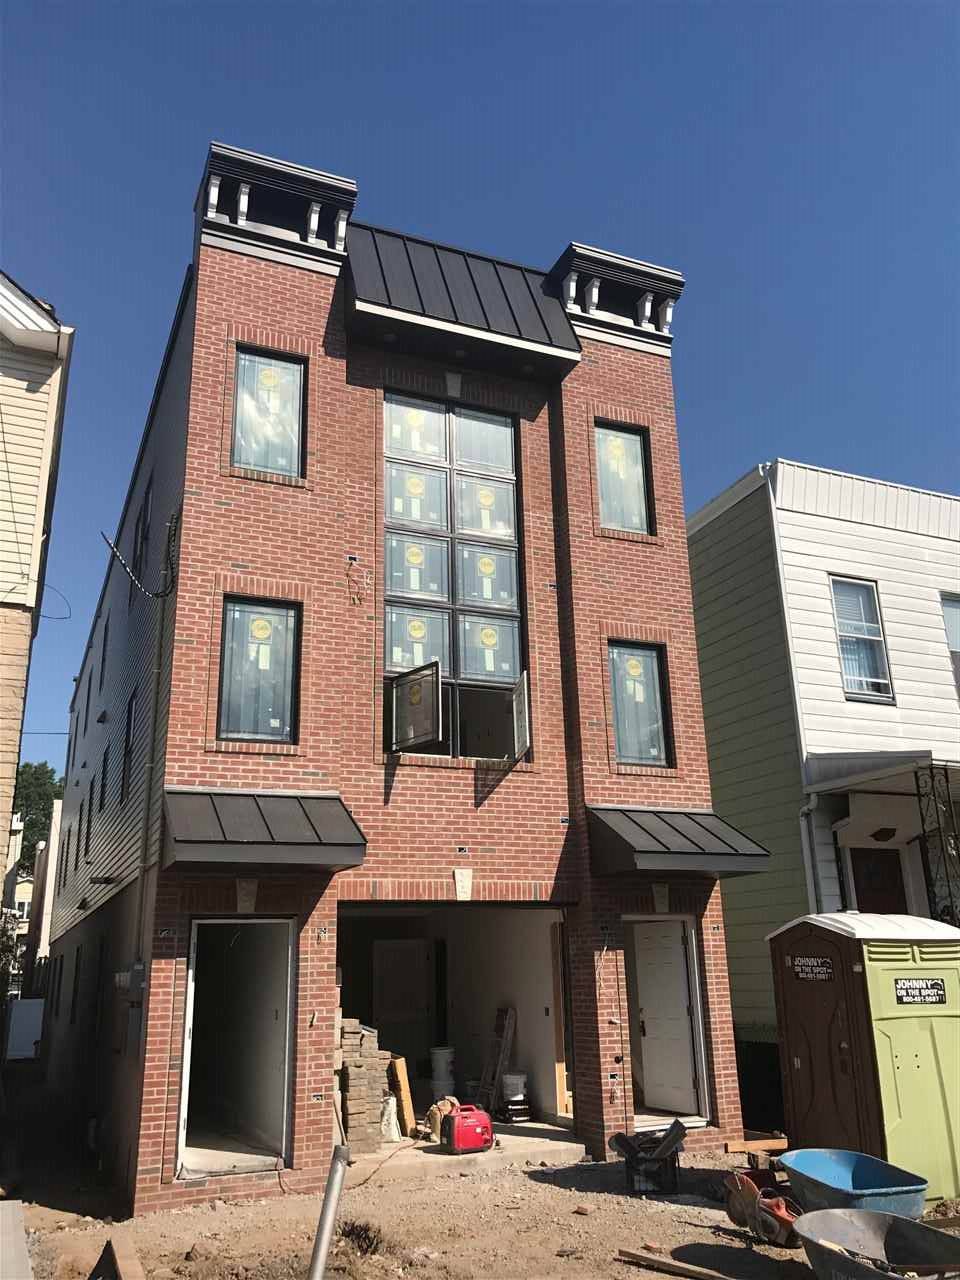 BRAND NEW DUPLEX CONDO ON GREAT BLOCK - 3 BR Condo The Heights New Jersey